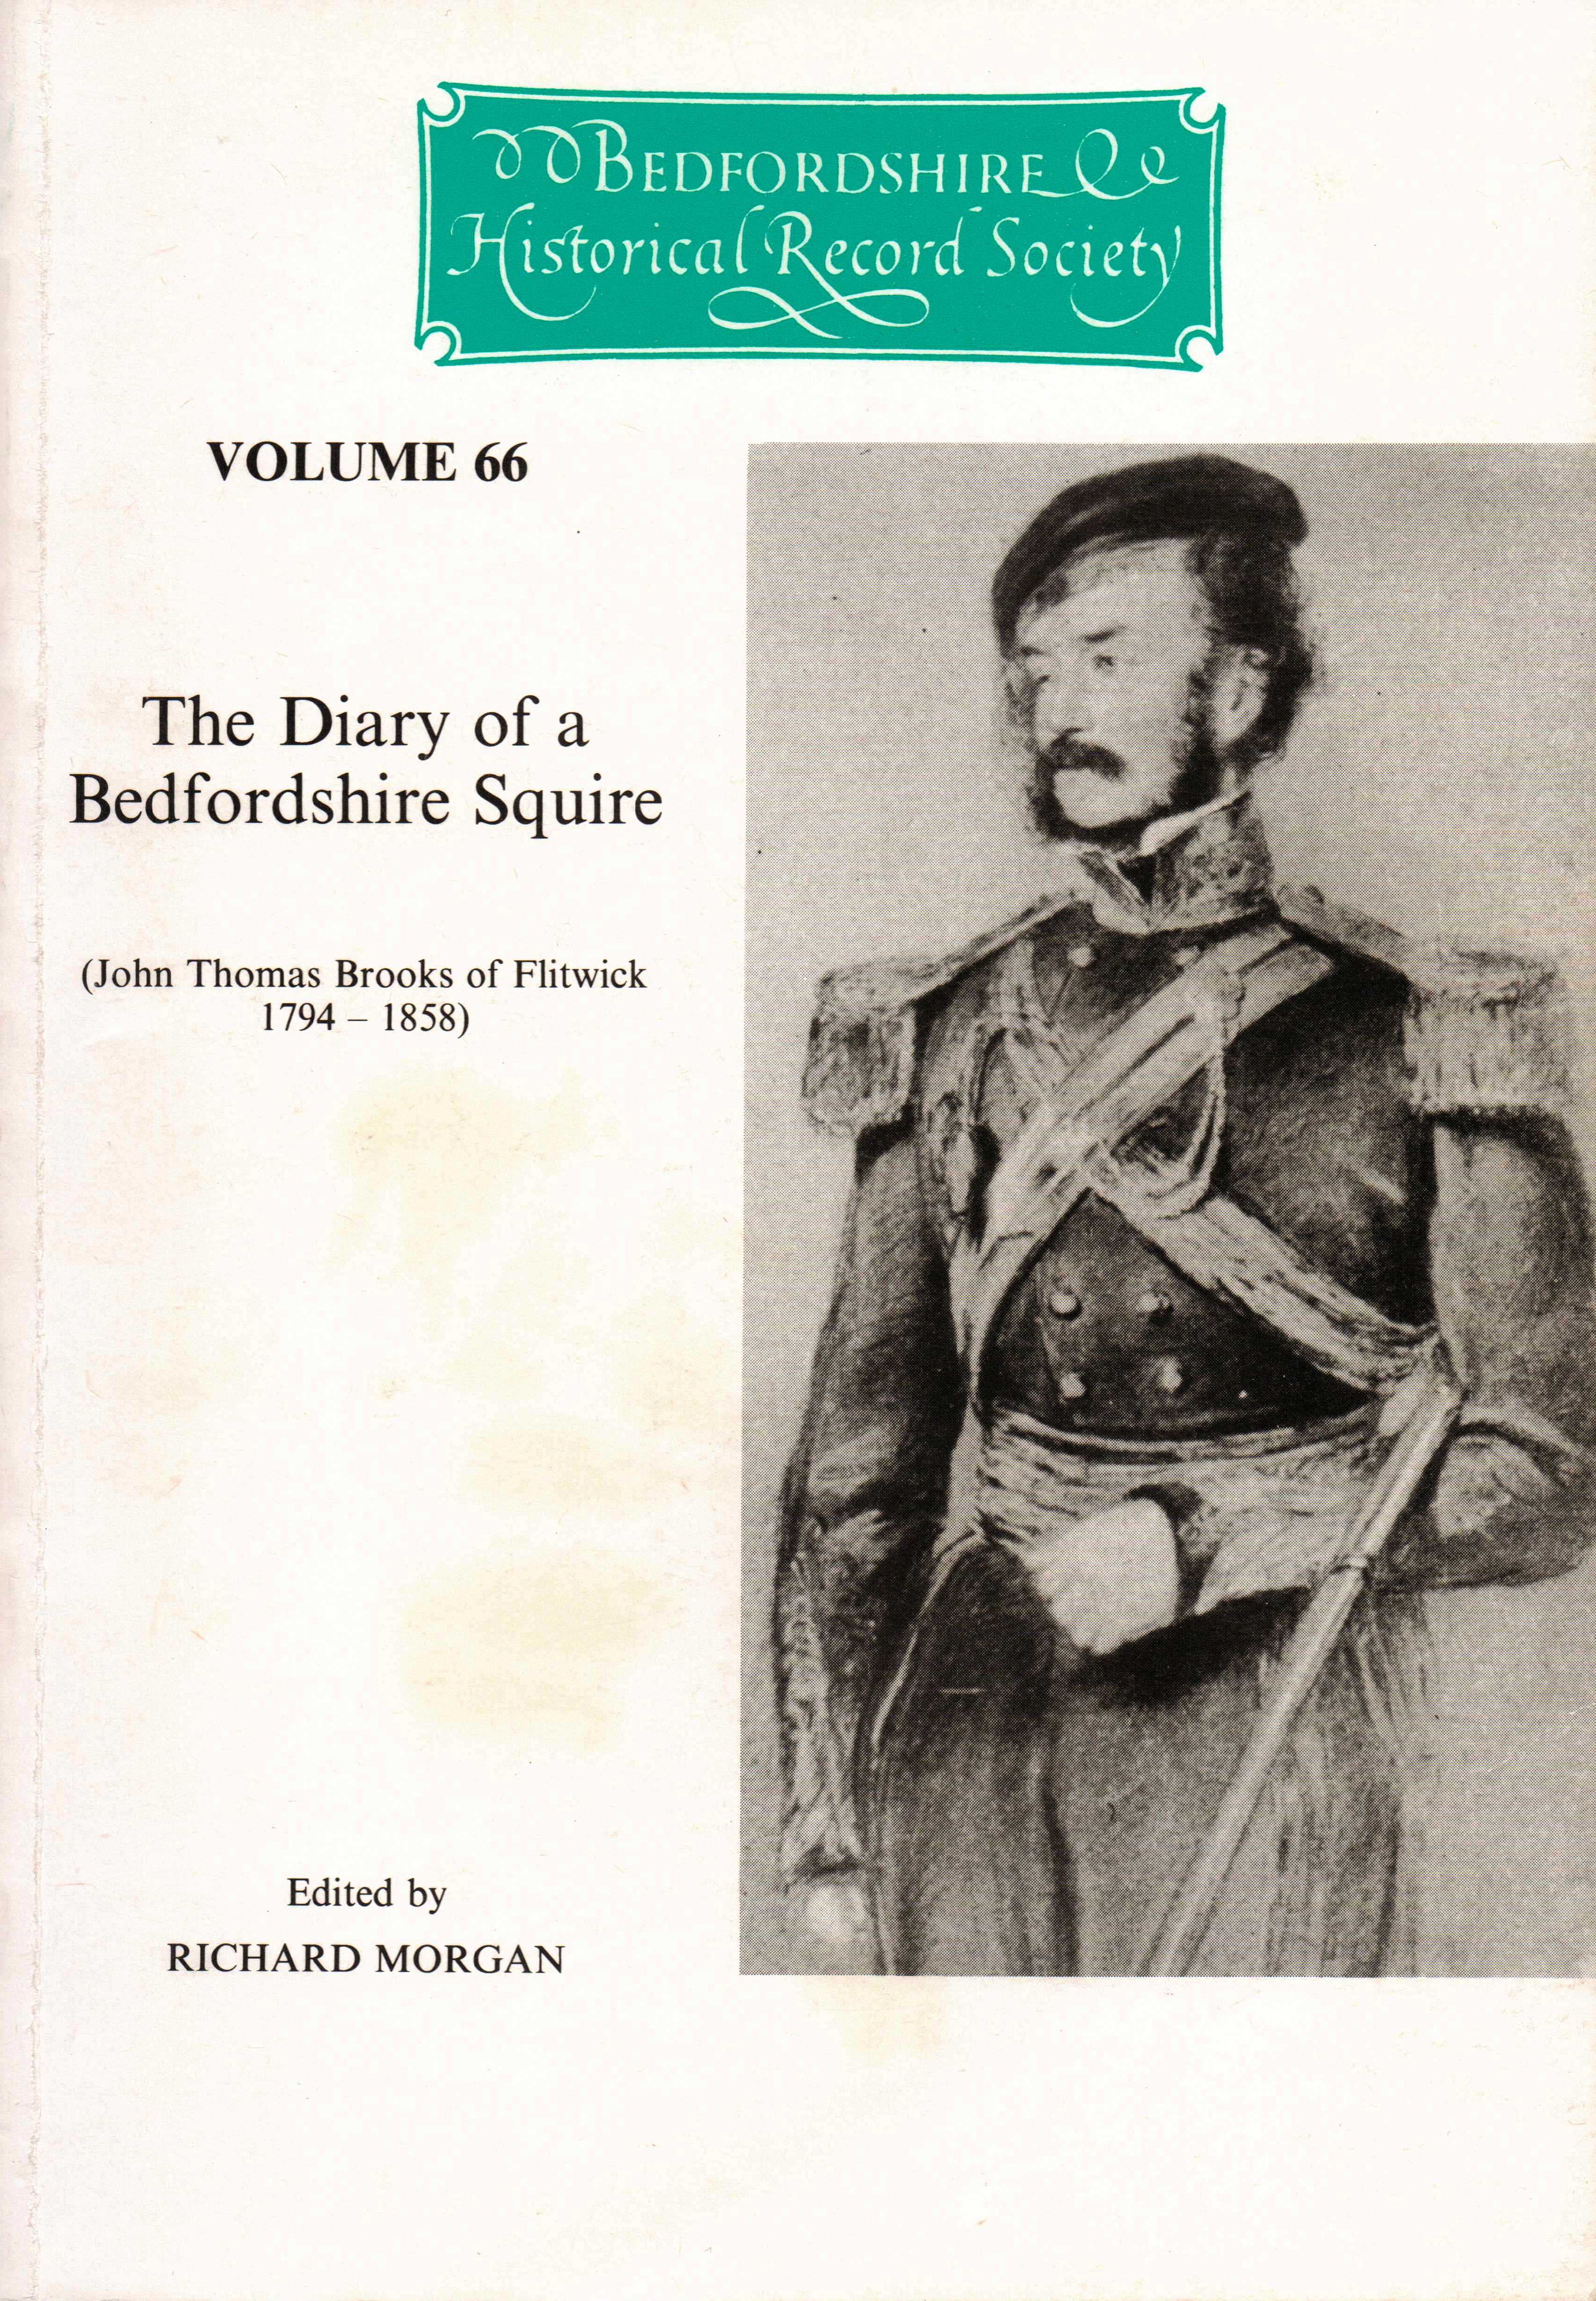 The diary of a Bedfordshire squire